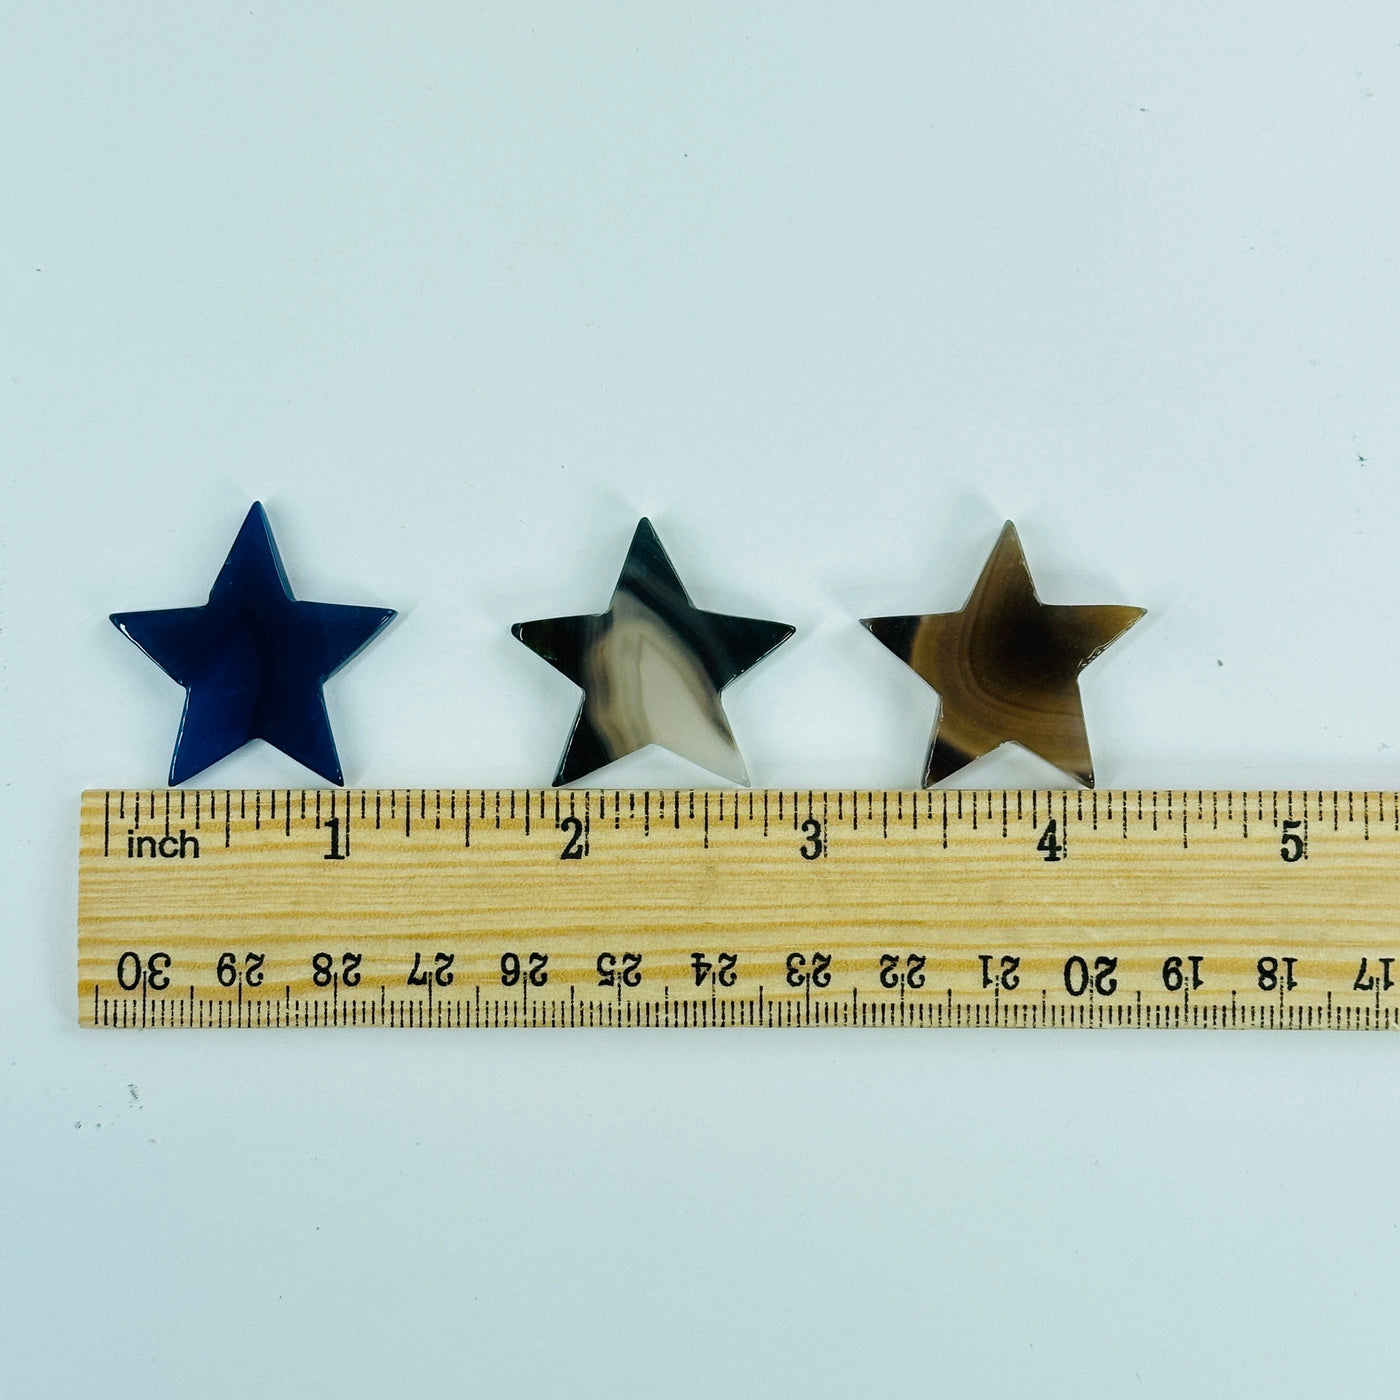 dyed agate stars next to a ruler for size reference